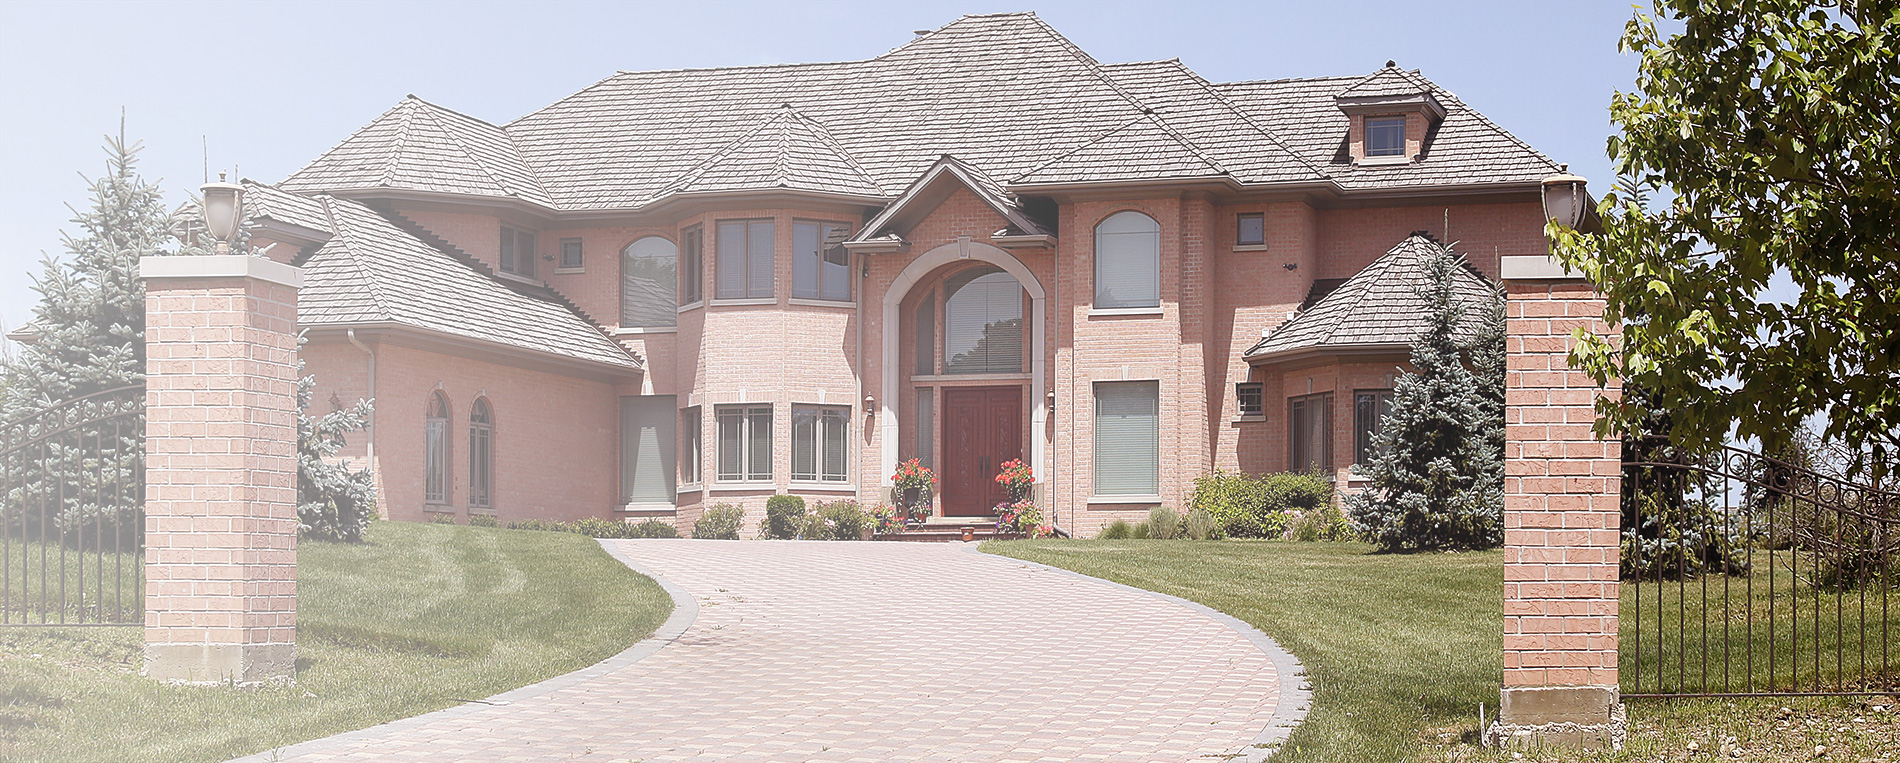 Four Signs That Your Paver Stones Need Repairs